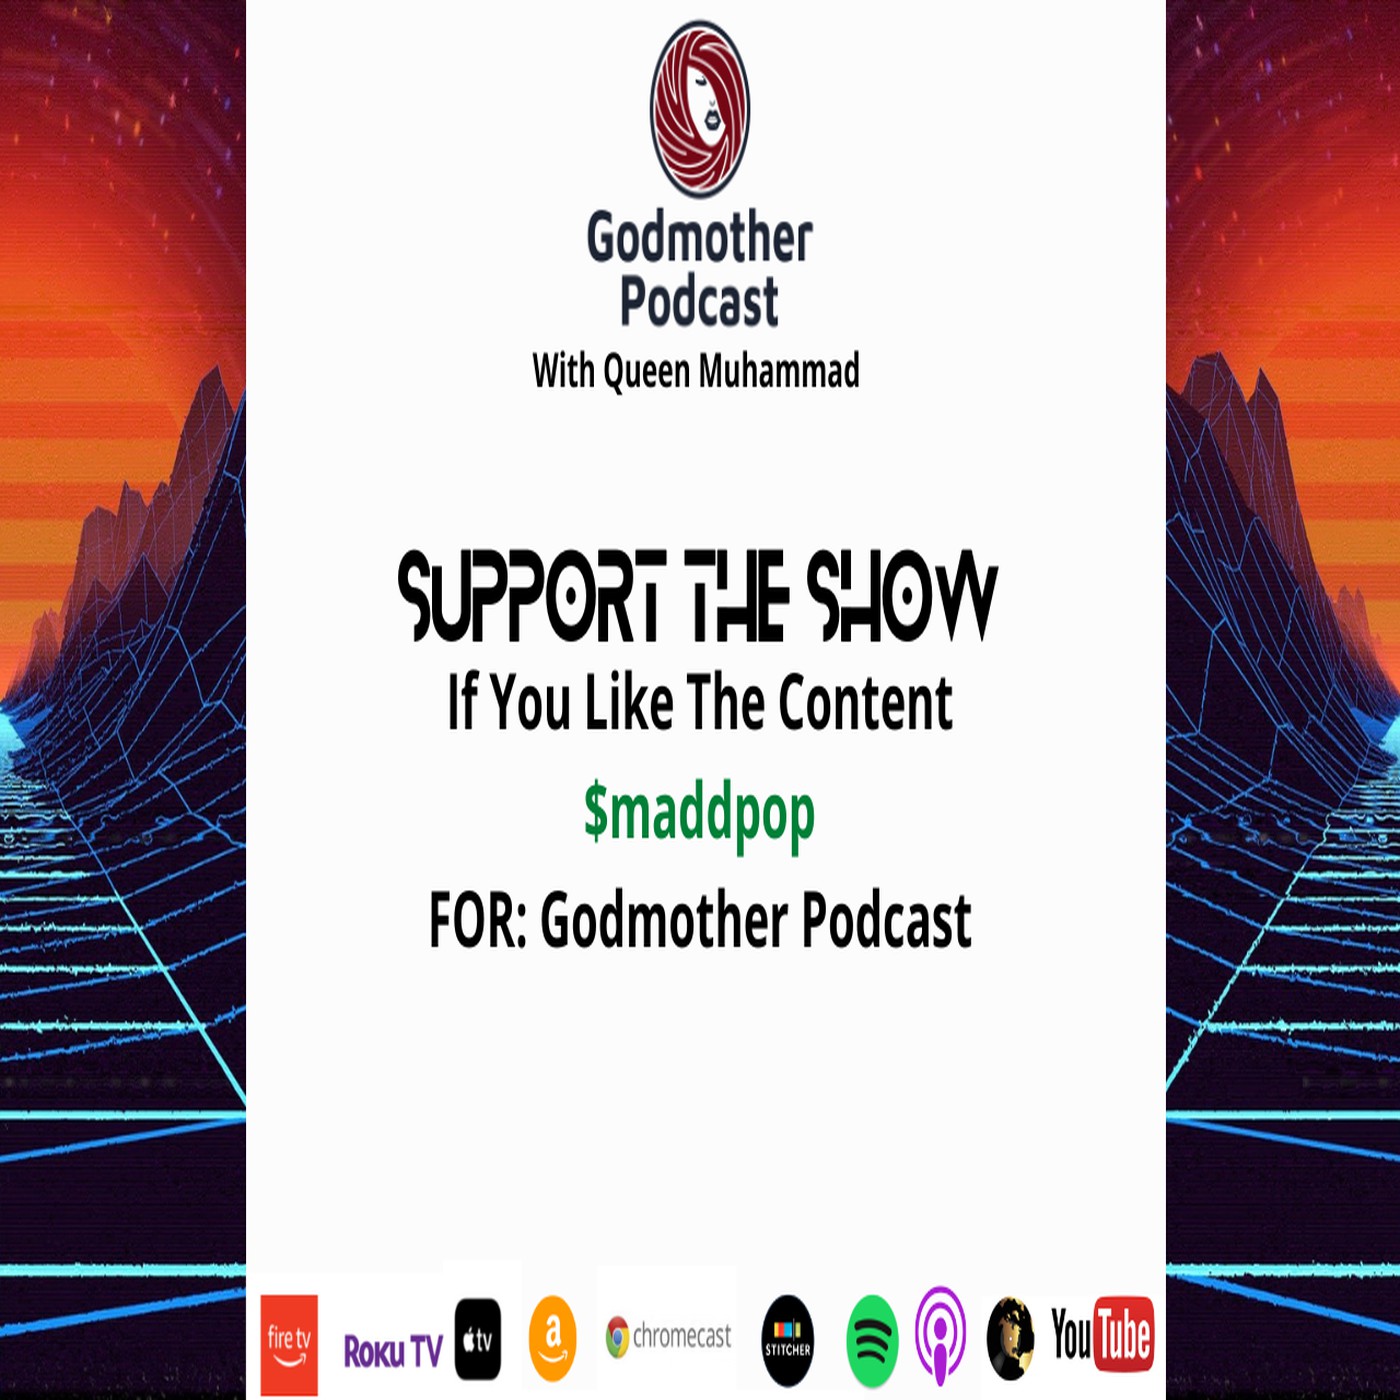 The Godmother Podcast